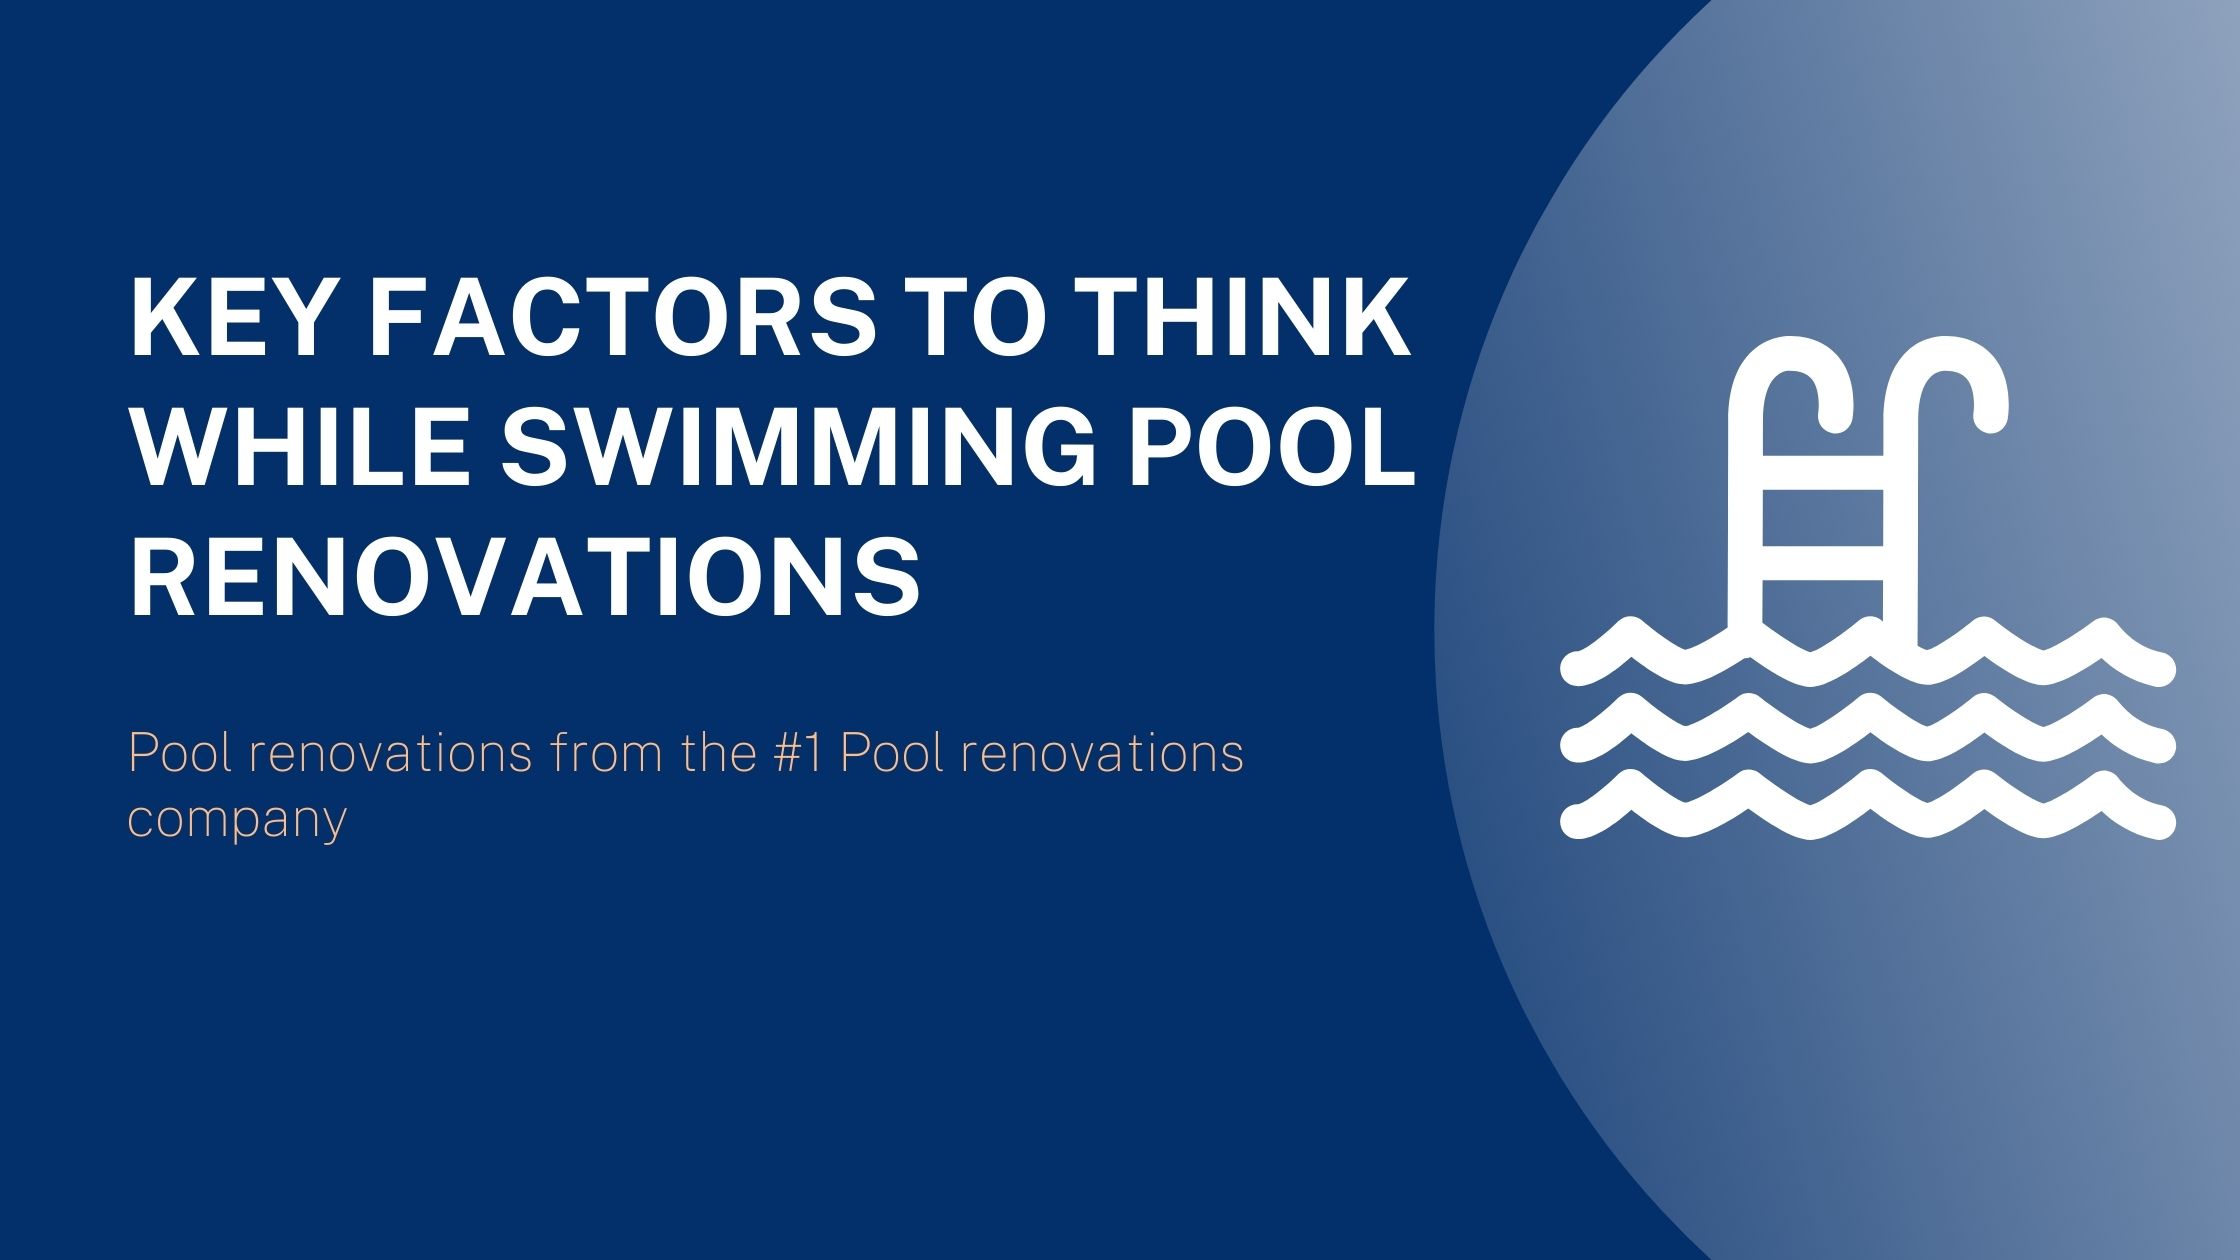 Key Factors to Think While Swimming Pool Renovations